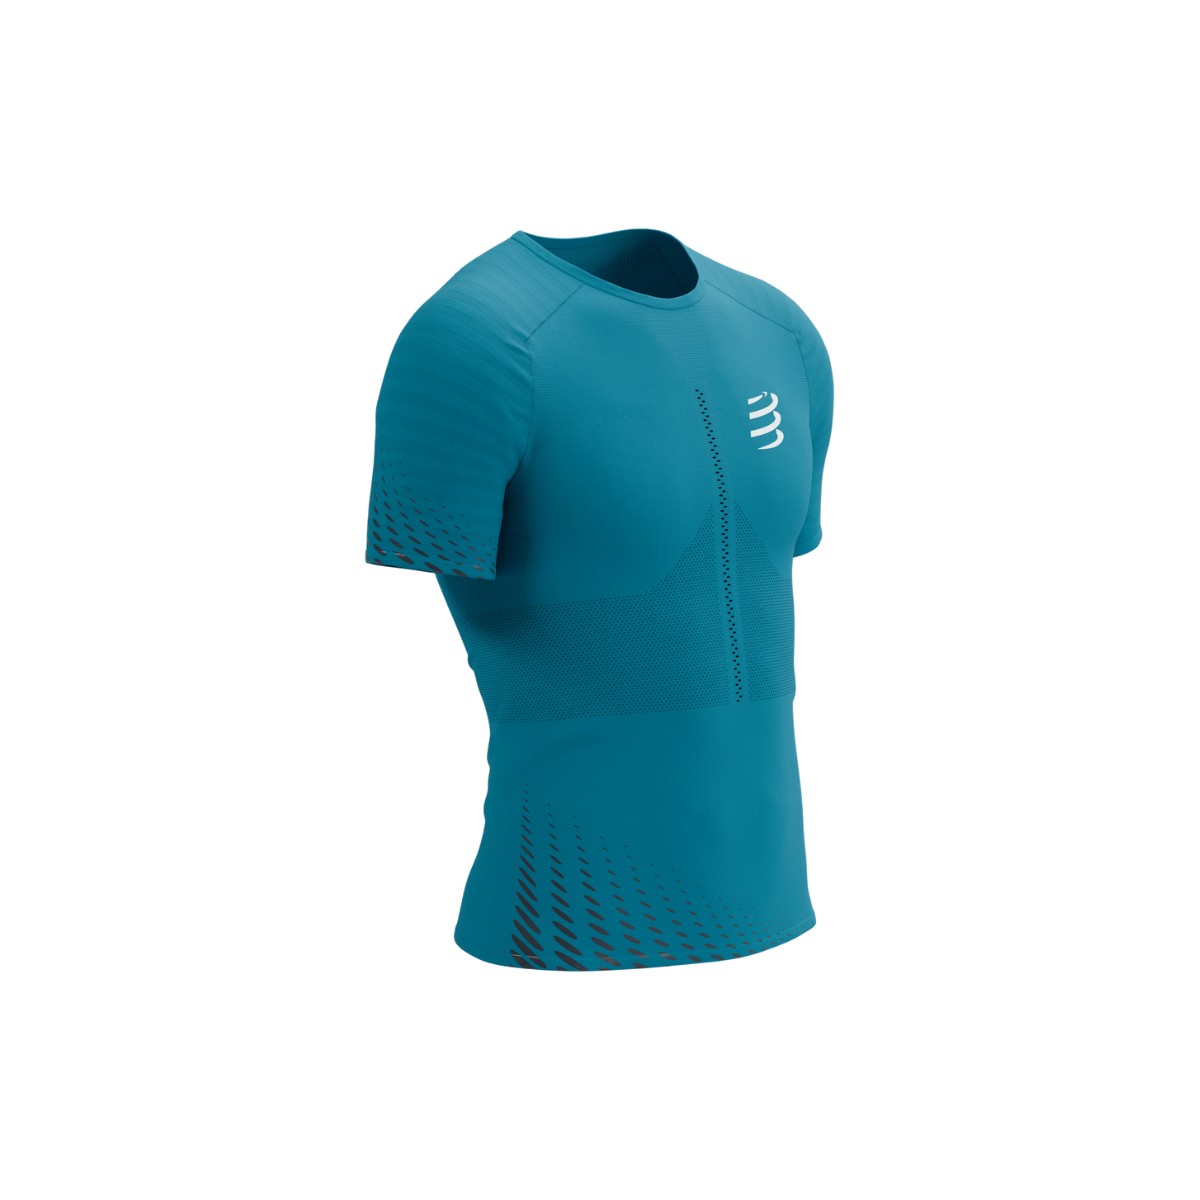 t-shirt compressport racing ss turquoise, taille s